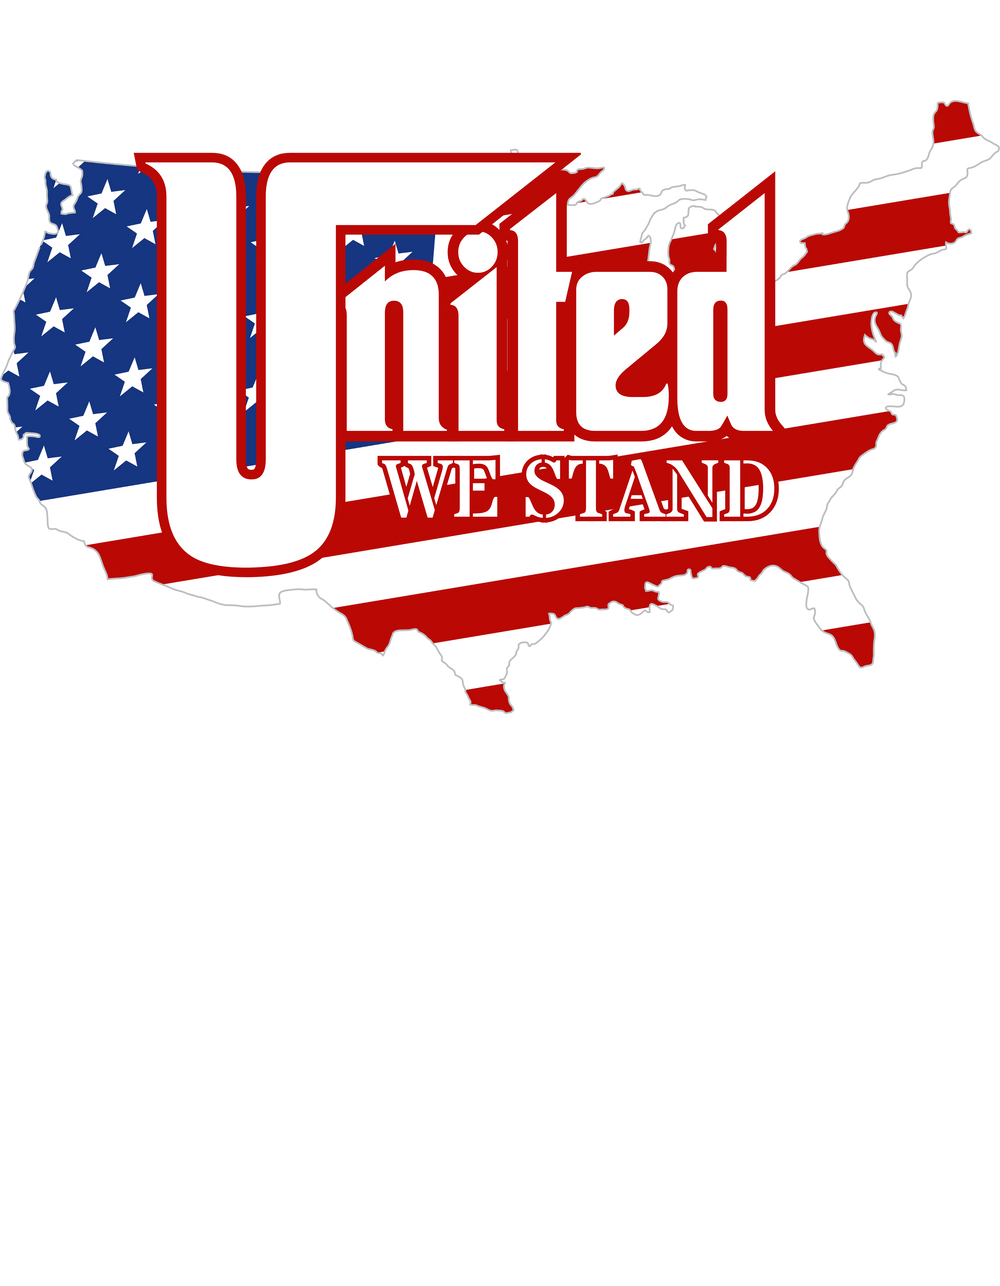 United We Stand Tee: A map of the U.S. with a flag, red, white, and blue design, and a state map with stars. Premium fitted tee in 100% cotton, light fabric, tear-away label, ideal for workouts or daily wear.